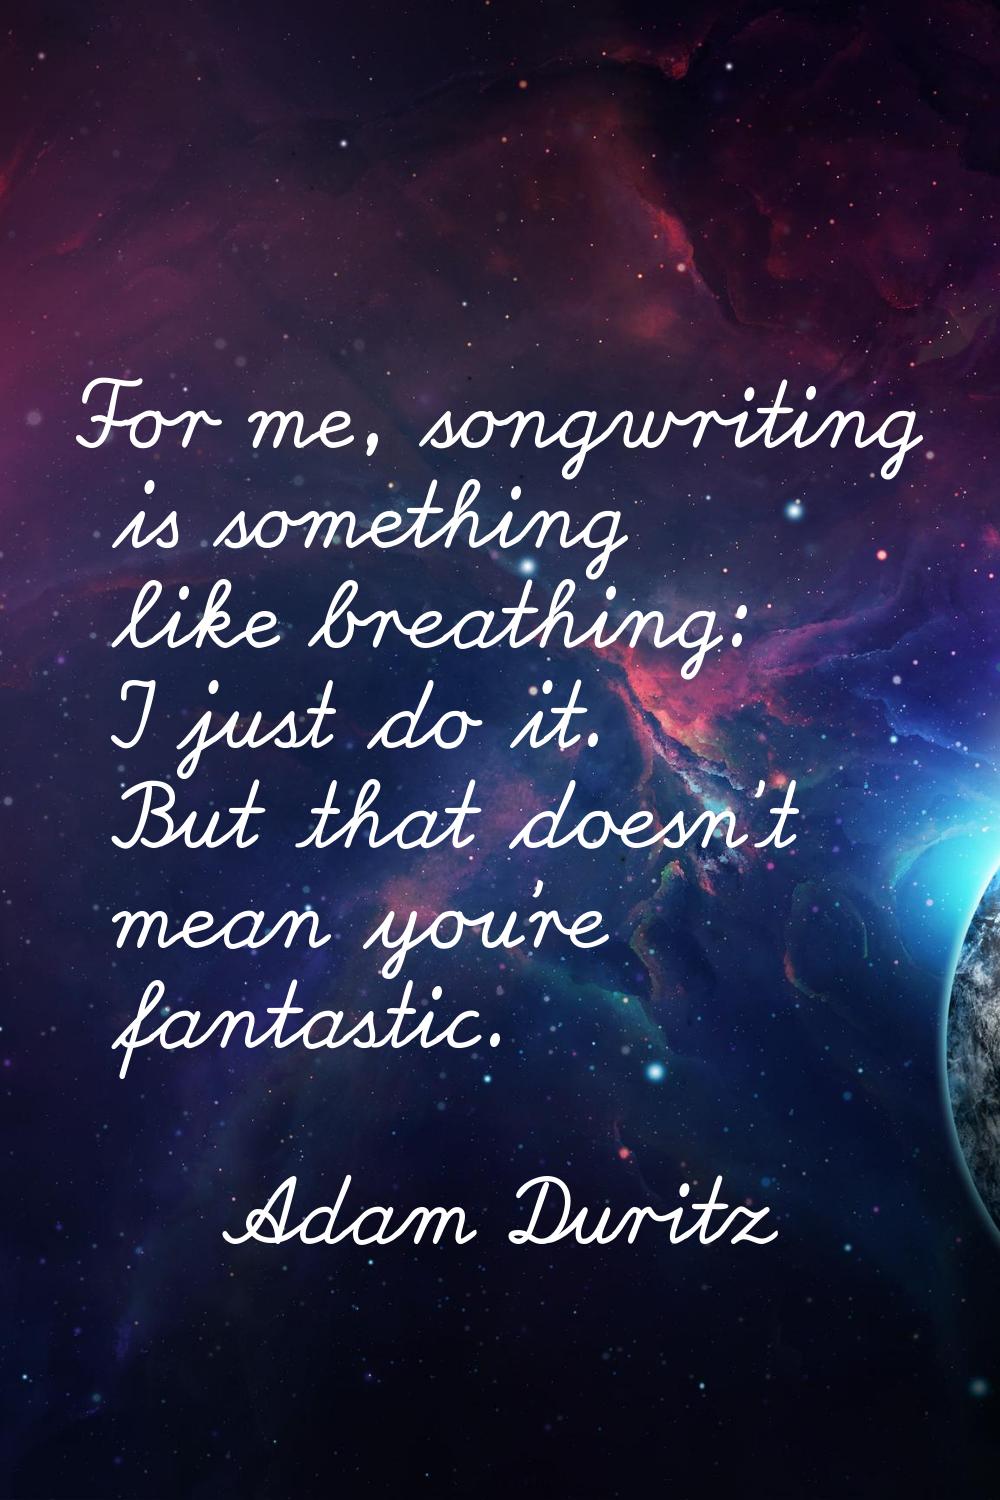 For me, songwriting is something like breathing: I just do it. But that doesn't mean you're fantast